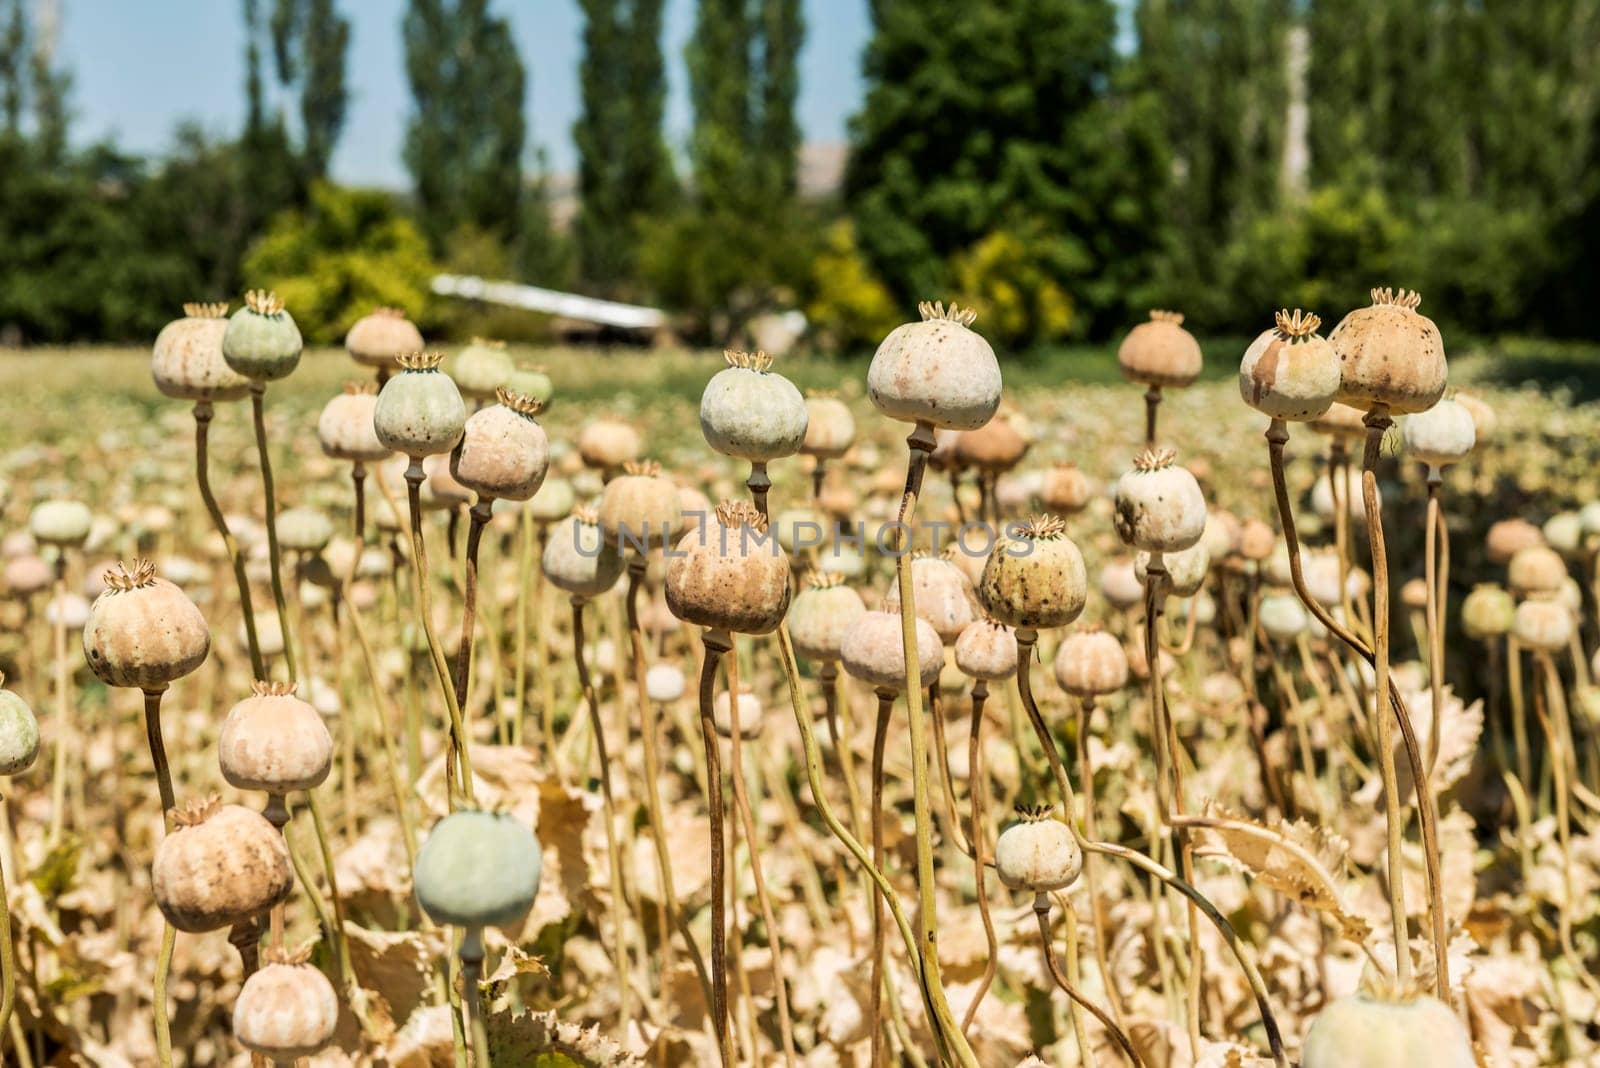 Opium poppies, They are watching you.